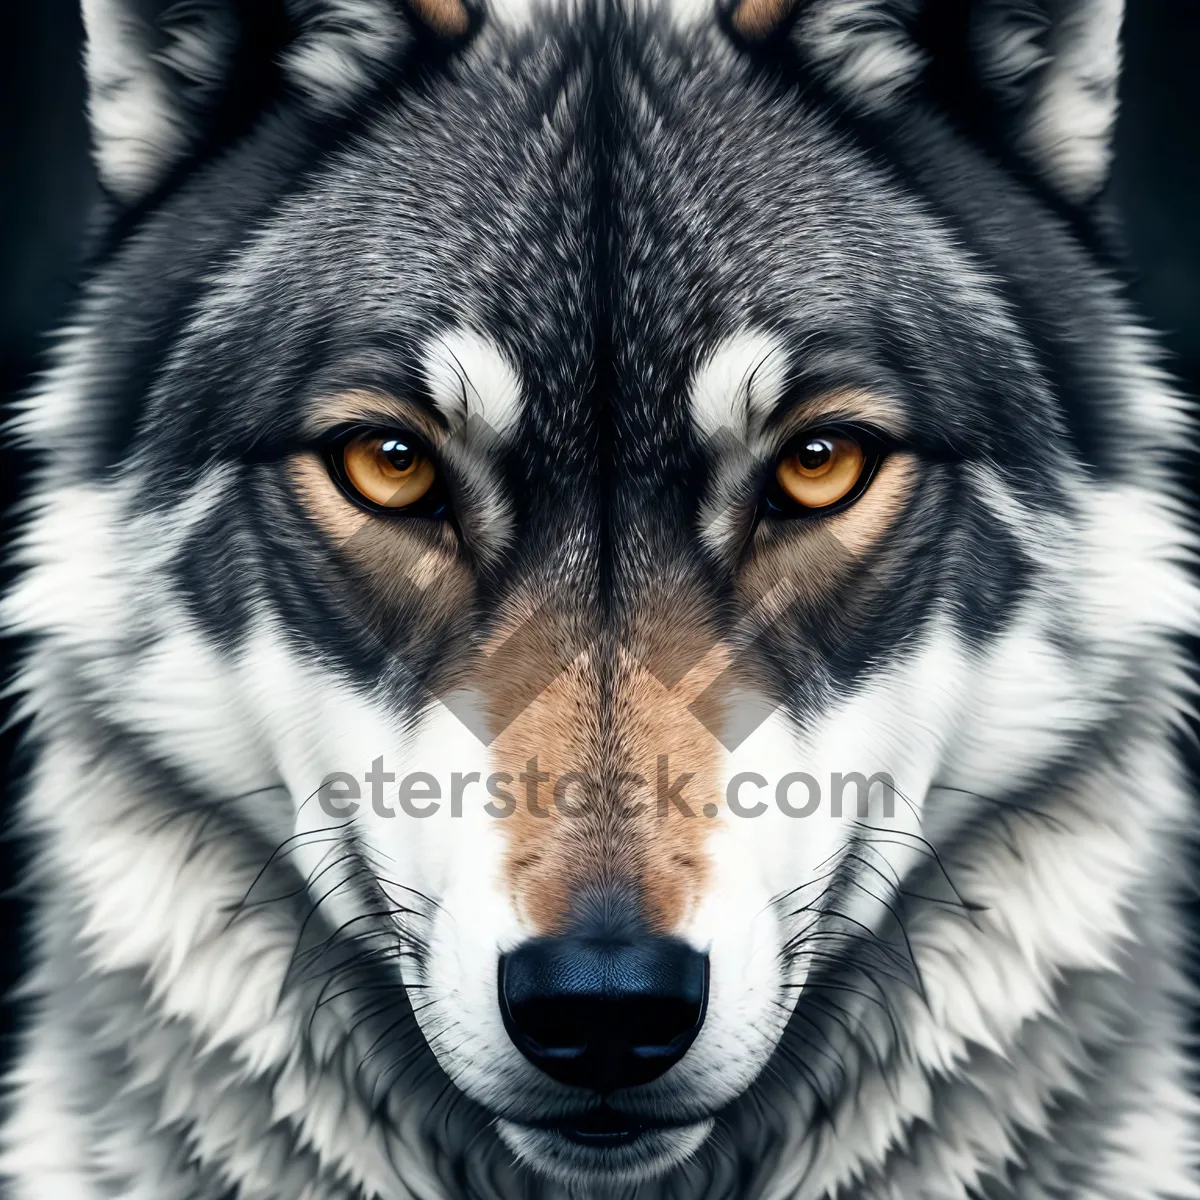 Picture of Wild Canine Portrait: Captivating Red Wolf with Piercing Eyes.